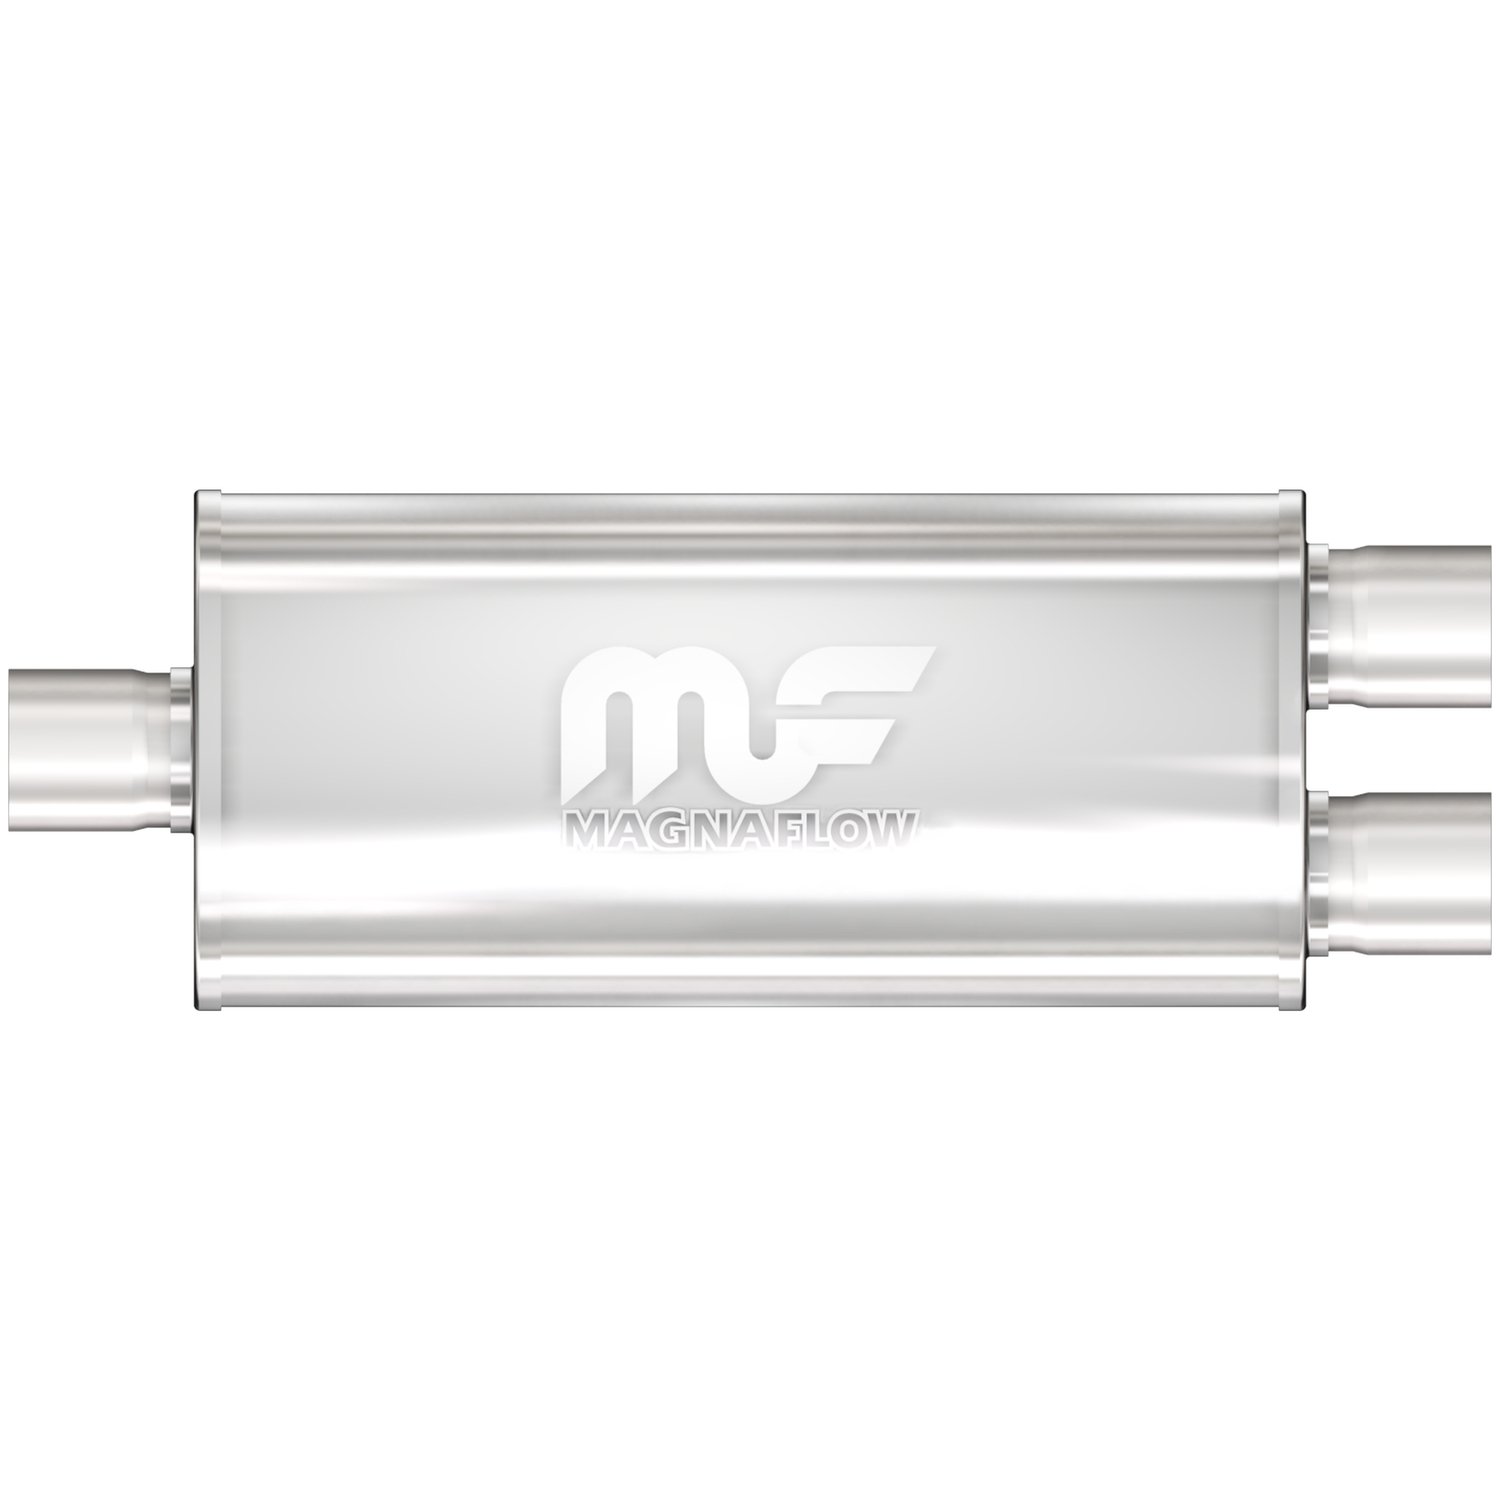 5" x 8" Oval Muffler Center In/Dual Out: 3" /2.5" Body Length: 18" Overall Length: 24" Core Size: 3" Satin Finish